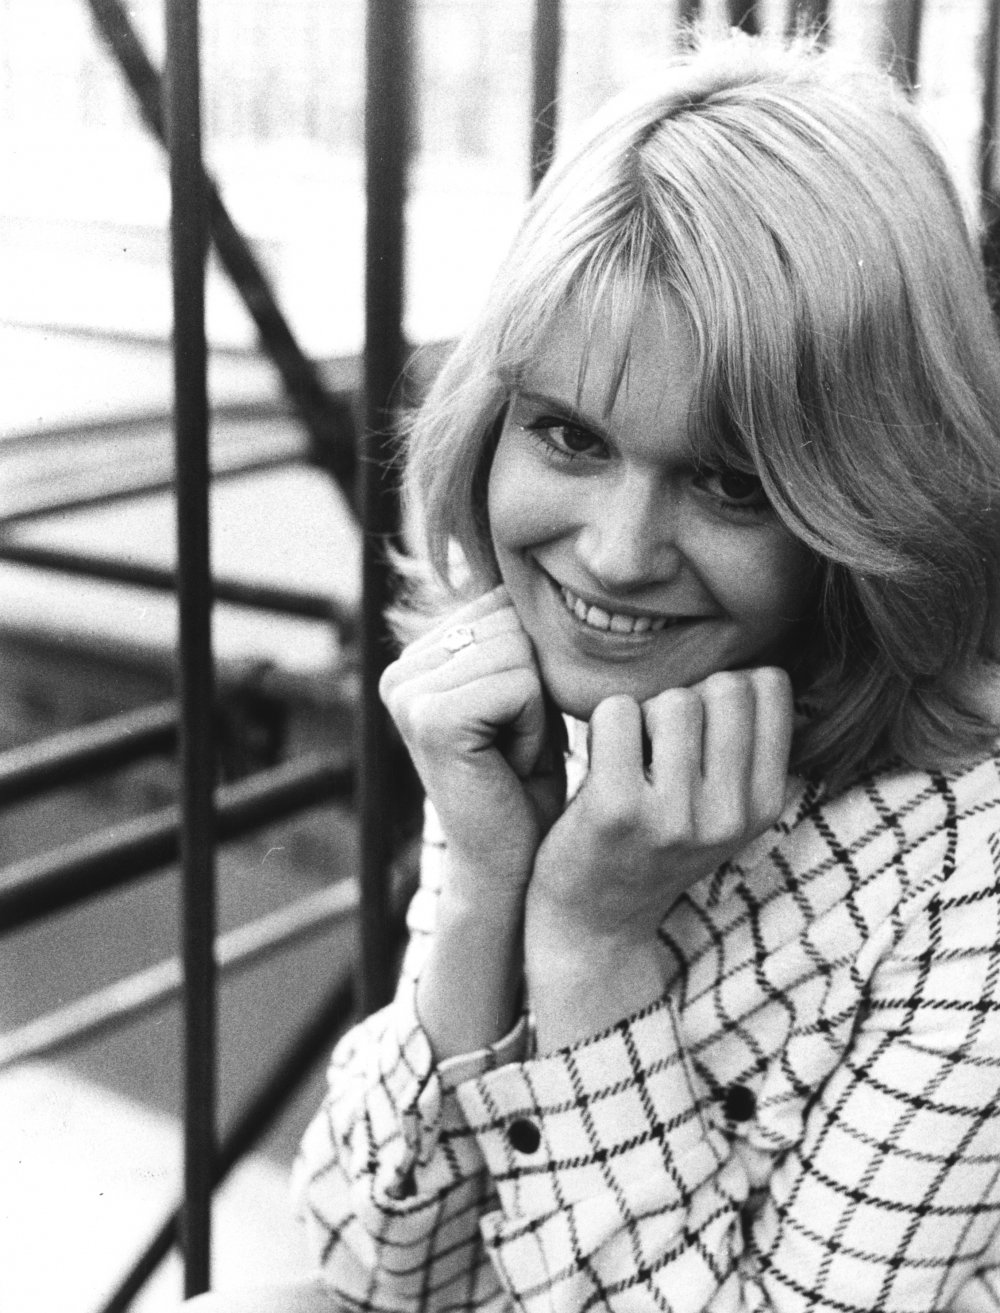 Carol White on location with Cathy Come Home (1966)